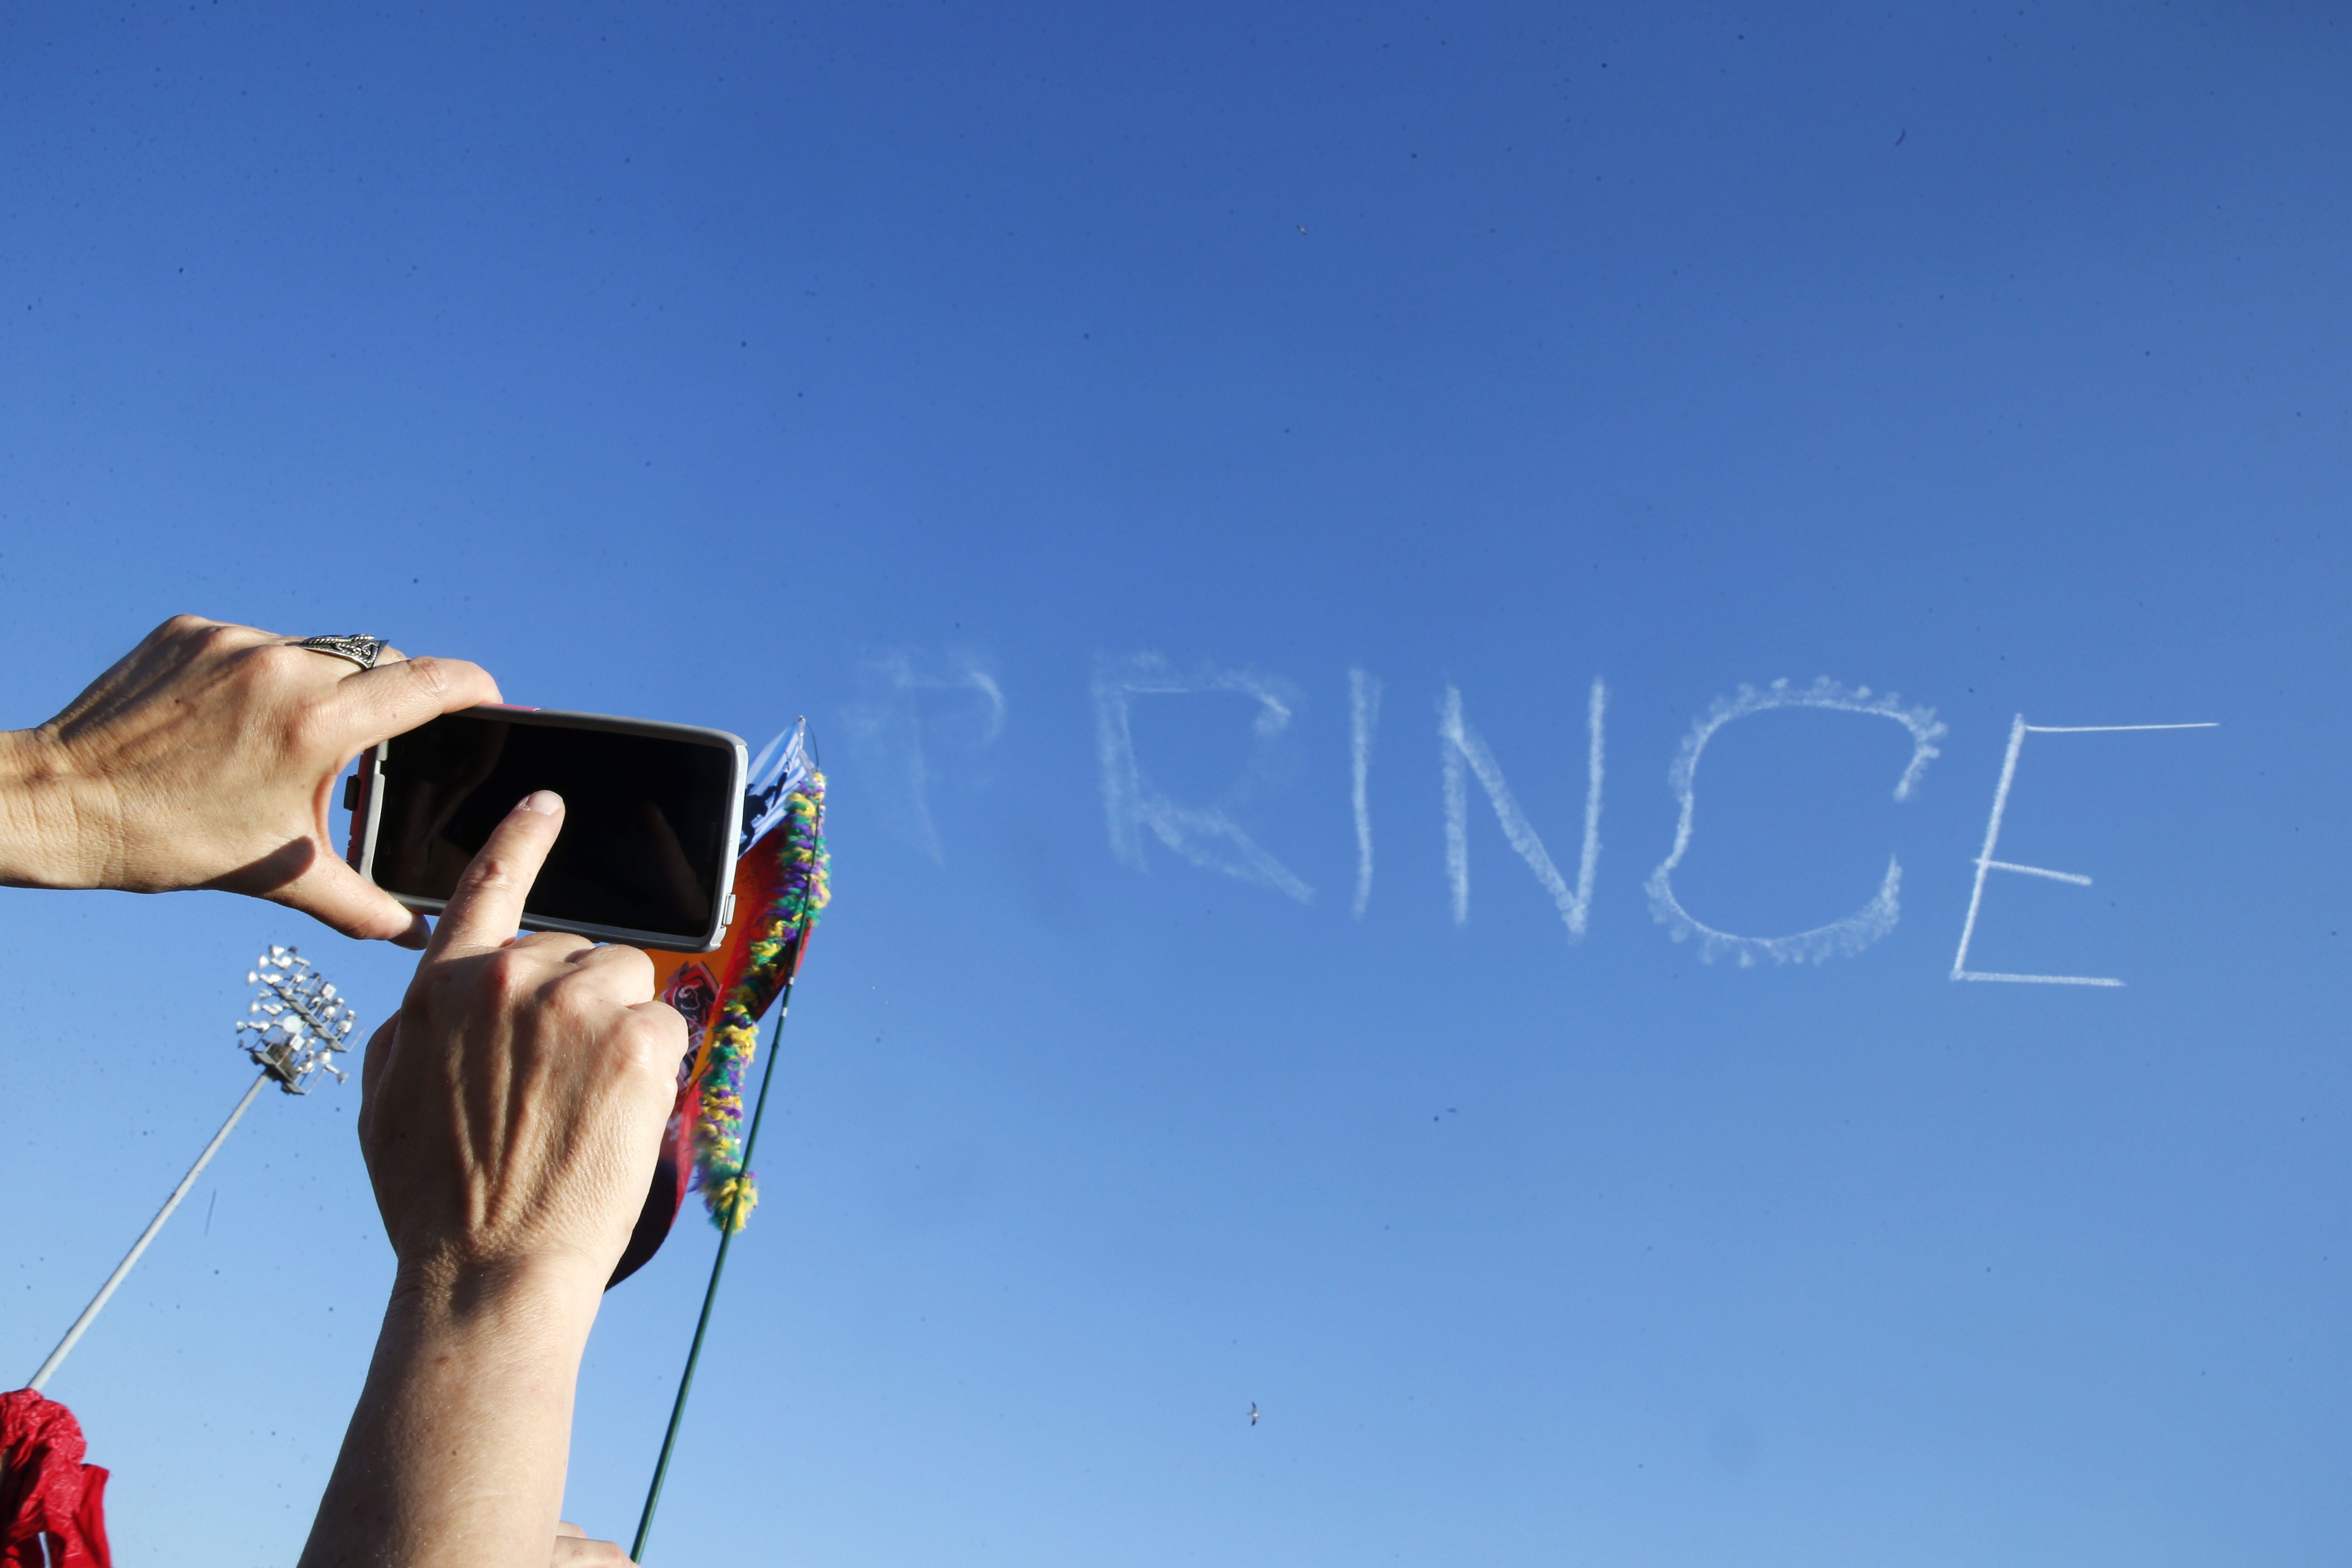 A festival-goer takes a photo as a skywriter spells "Prince," in honor of pop music icon Prince, at the New Orleans Jazz and Heritage Festival in New Orleans, Saturday, April 23, 2016. Prince died Thursday at the age of 57.